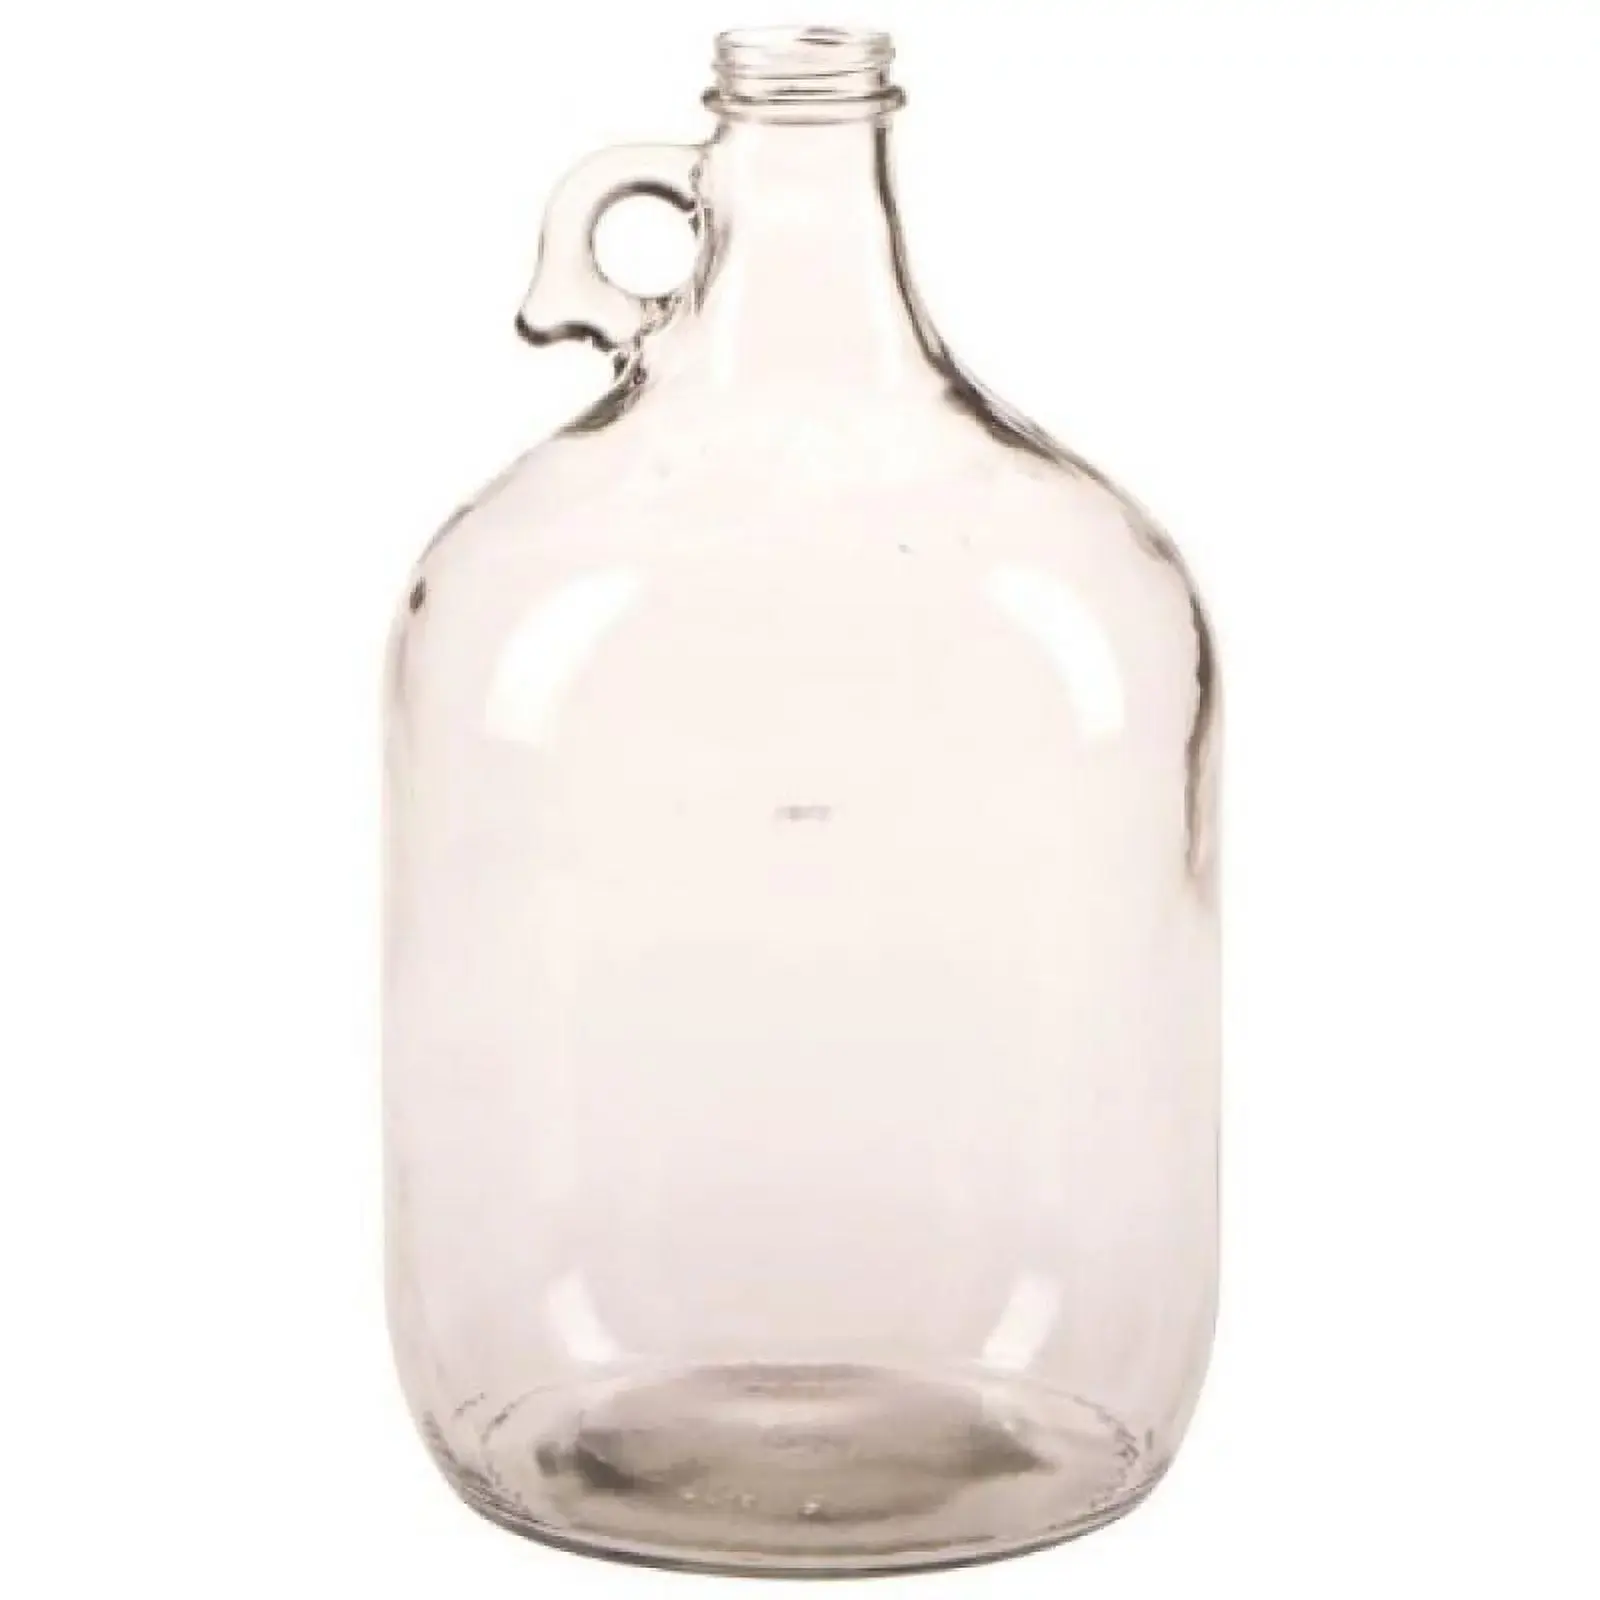 One-Gallon-Clear-Glass-Jug-with-Handle-High-Quality-Glass_2149ecab-f084-4631-b4df-1c50e028d37f.f183b119541eb27f1d2e50c74209831c